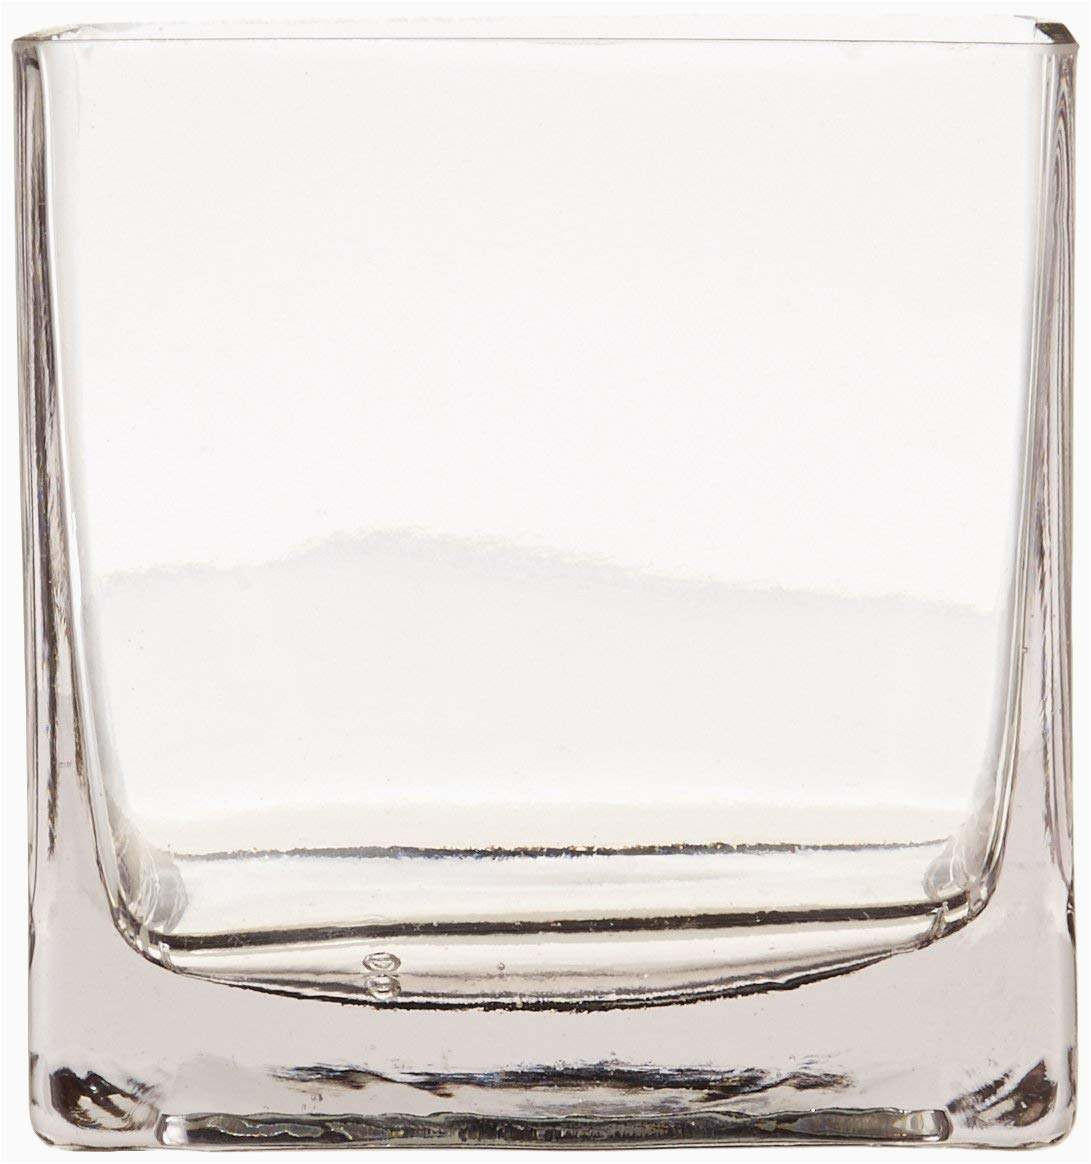 24 Awesome Square Glass Wall Vase 2023 free download square glass wall vase of clear flat glass ornaments gallery amazon 12piece 4 square crystal pertaining to clear flat glass ornaments photo amazon 12piece 4 square crystal clear glass vase h